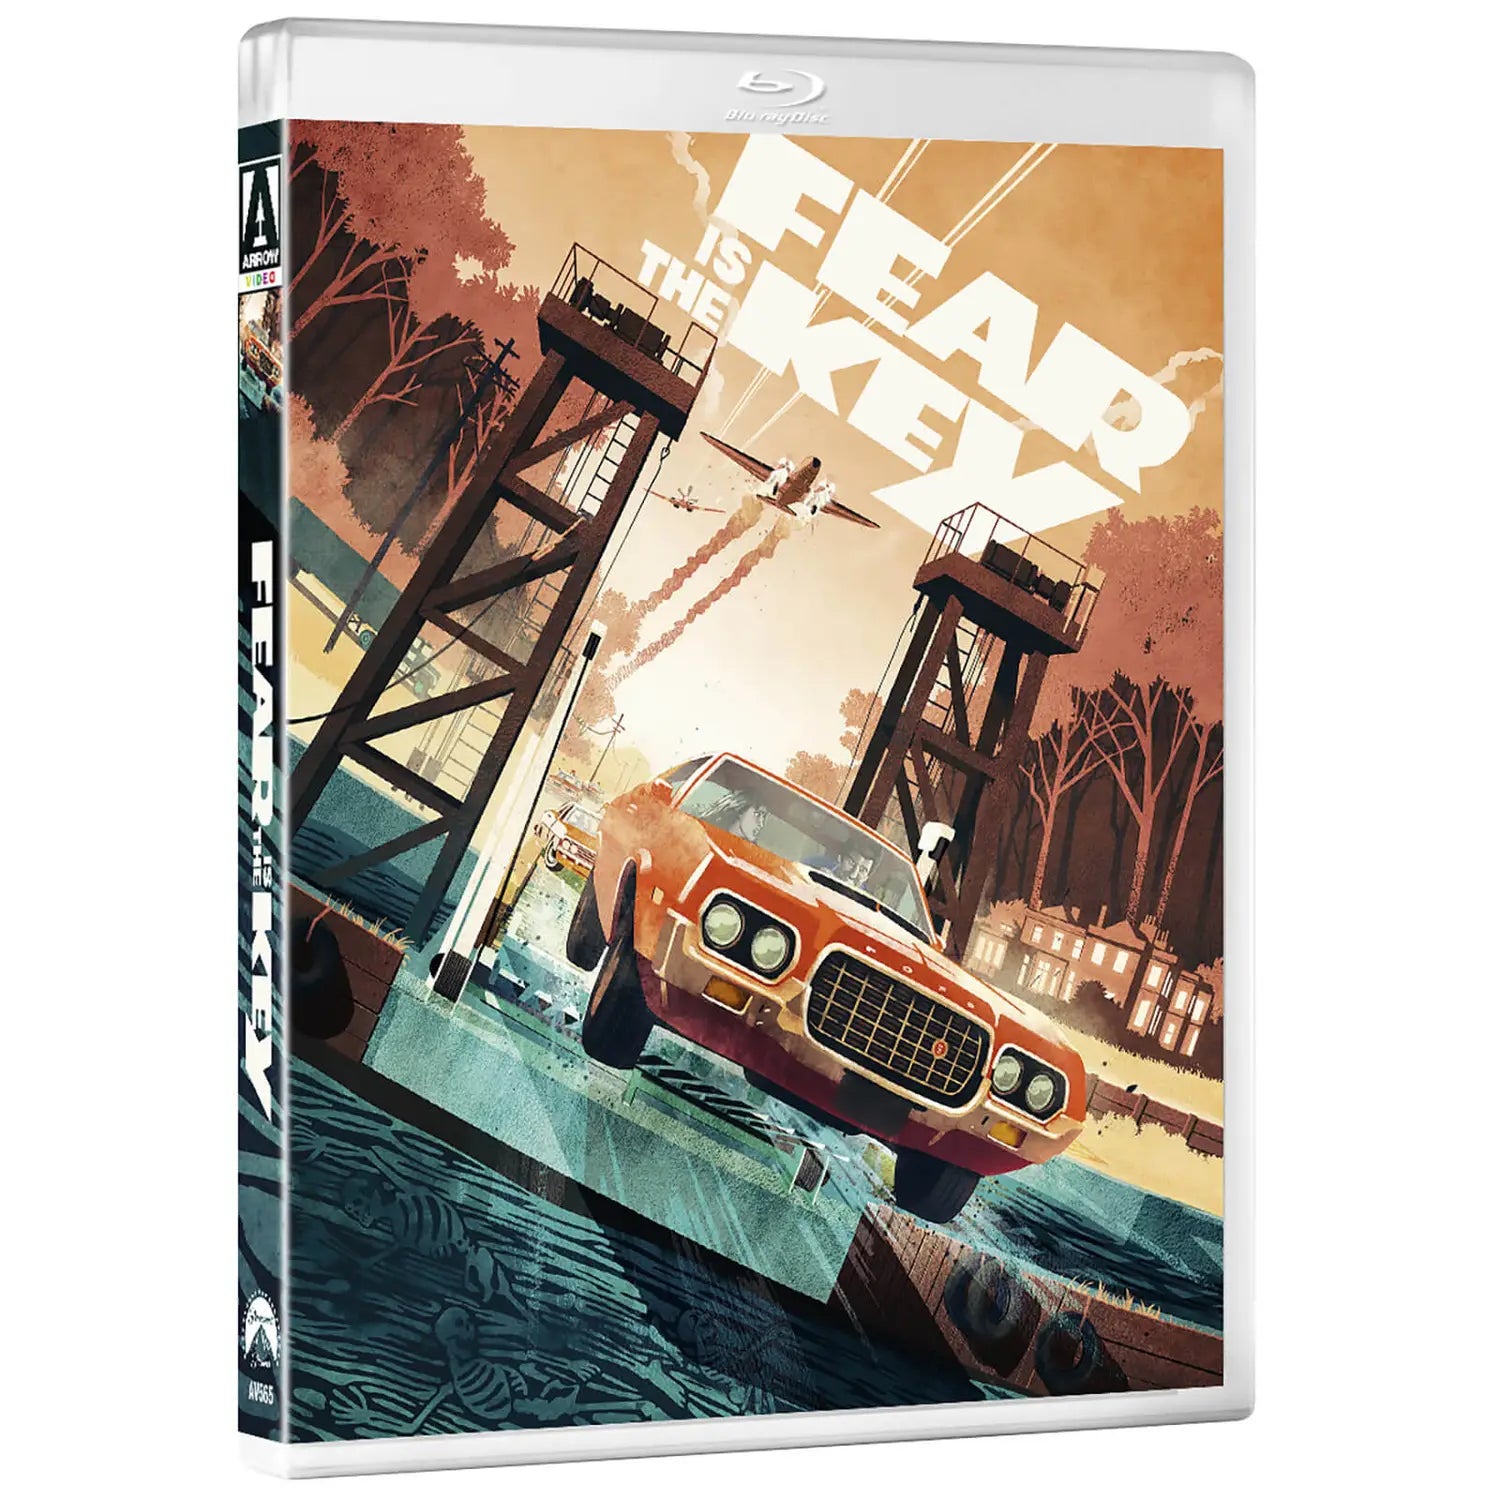 Fear is the Key Blu-ray with Slipcover (Arrow U.S.) – The Atomic 